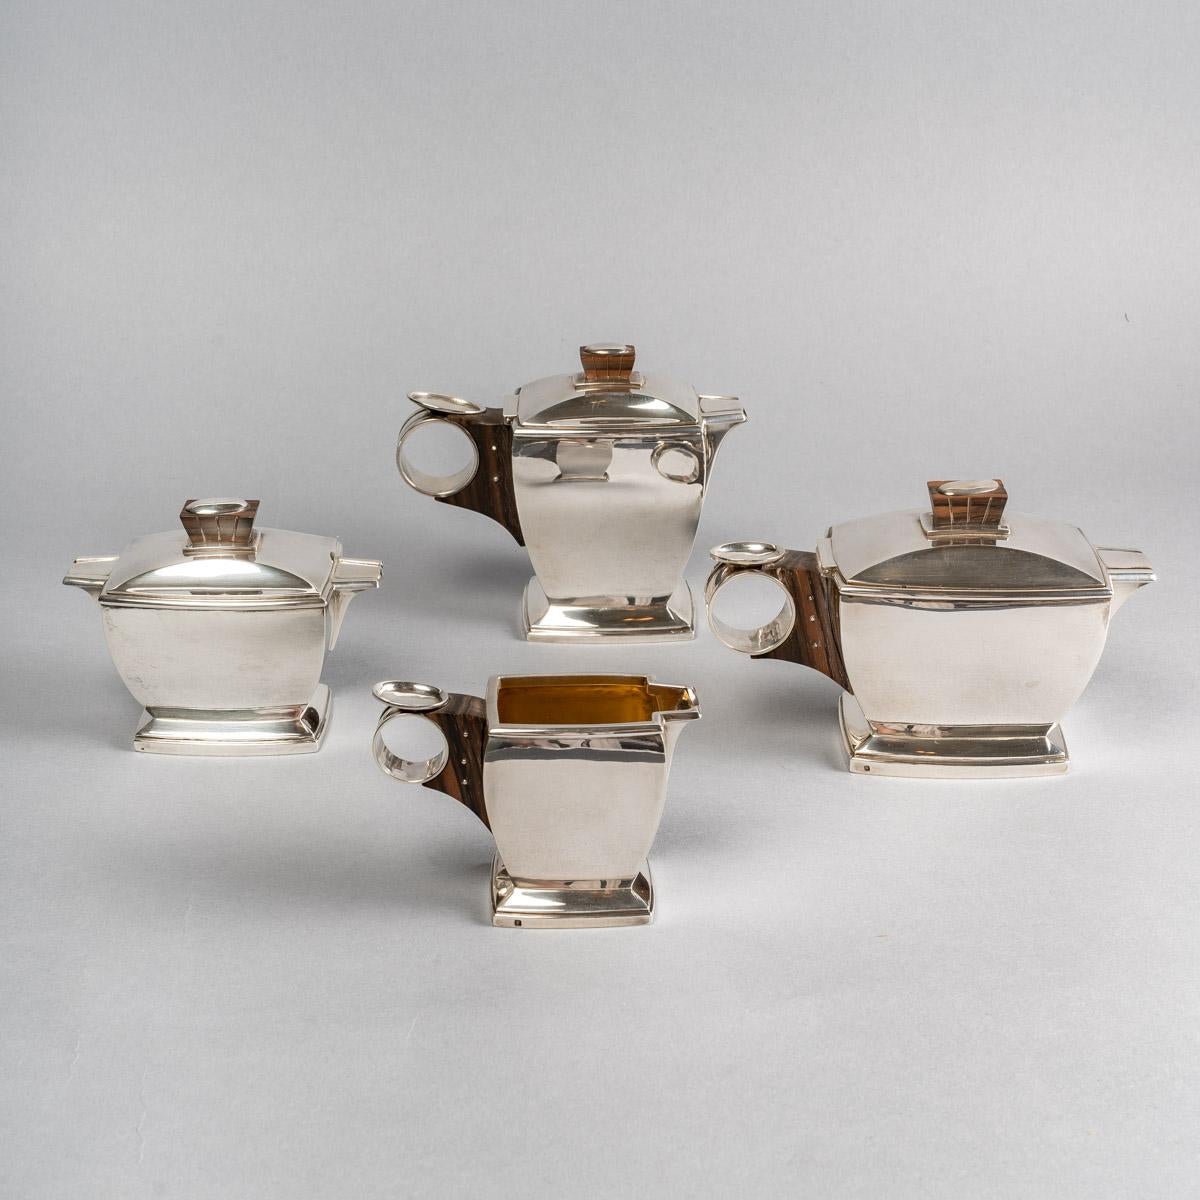 Tea and coffee egoiste set in sterling pure silver and macassar by BOin Taburet created in the 1920s.

Service including :
- a coffee pot: 12 cm x 14 cm
- a teapot: 11 cm x 17 cm
- a pot milk: 7 cm x 10 cm
- a sugar bowl: 9.5 cm x 12 cm

Minerve